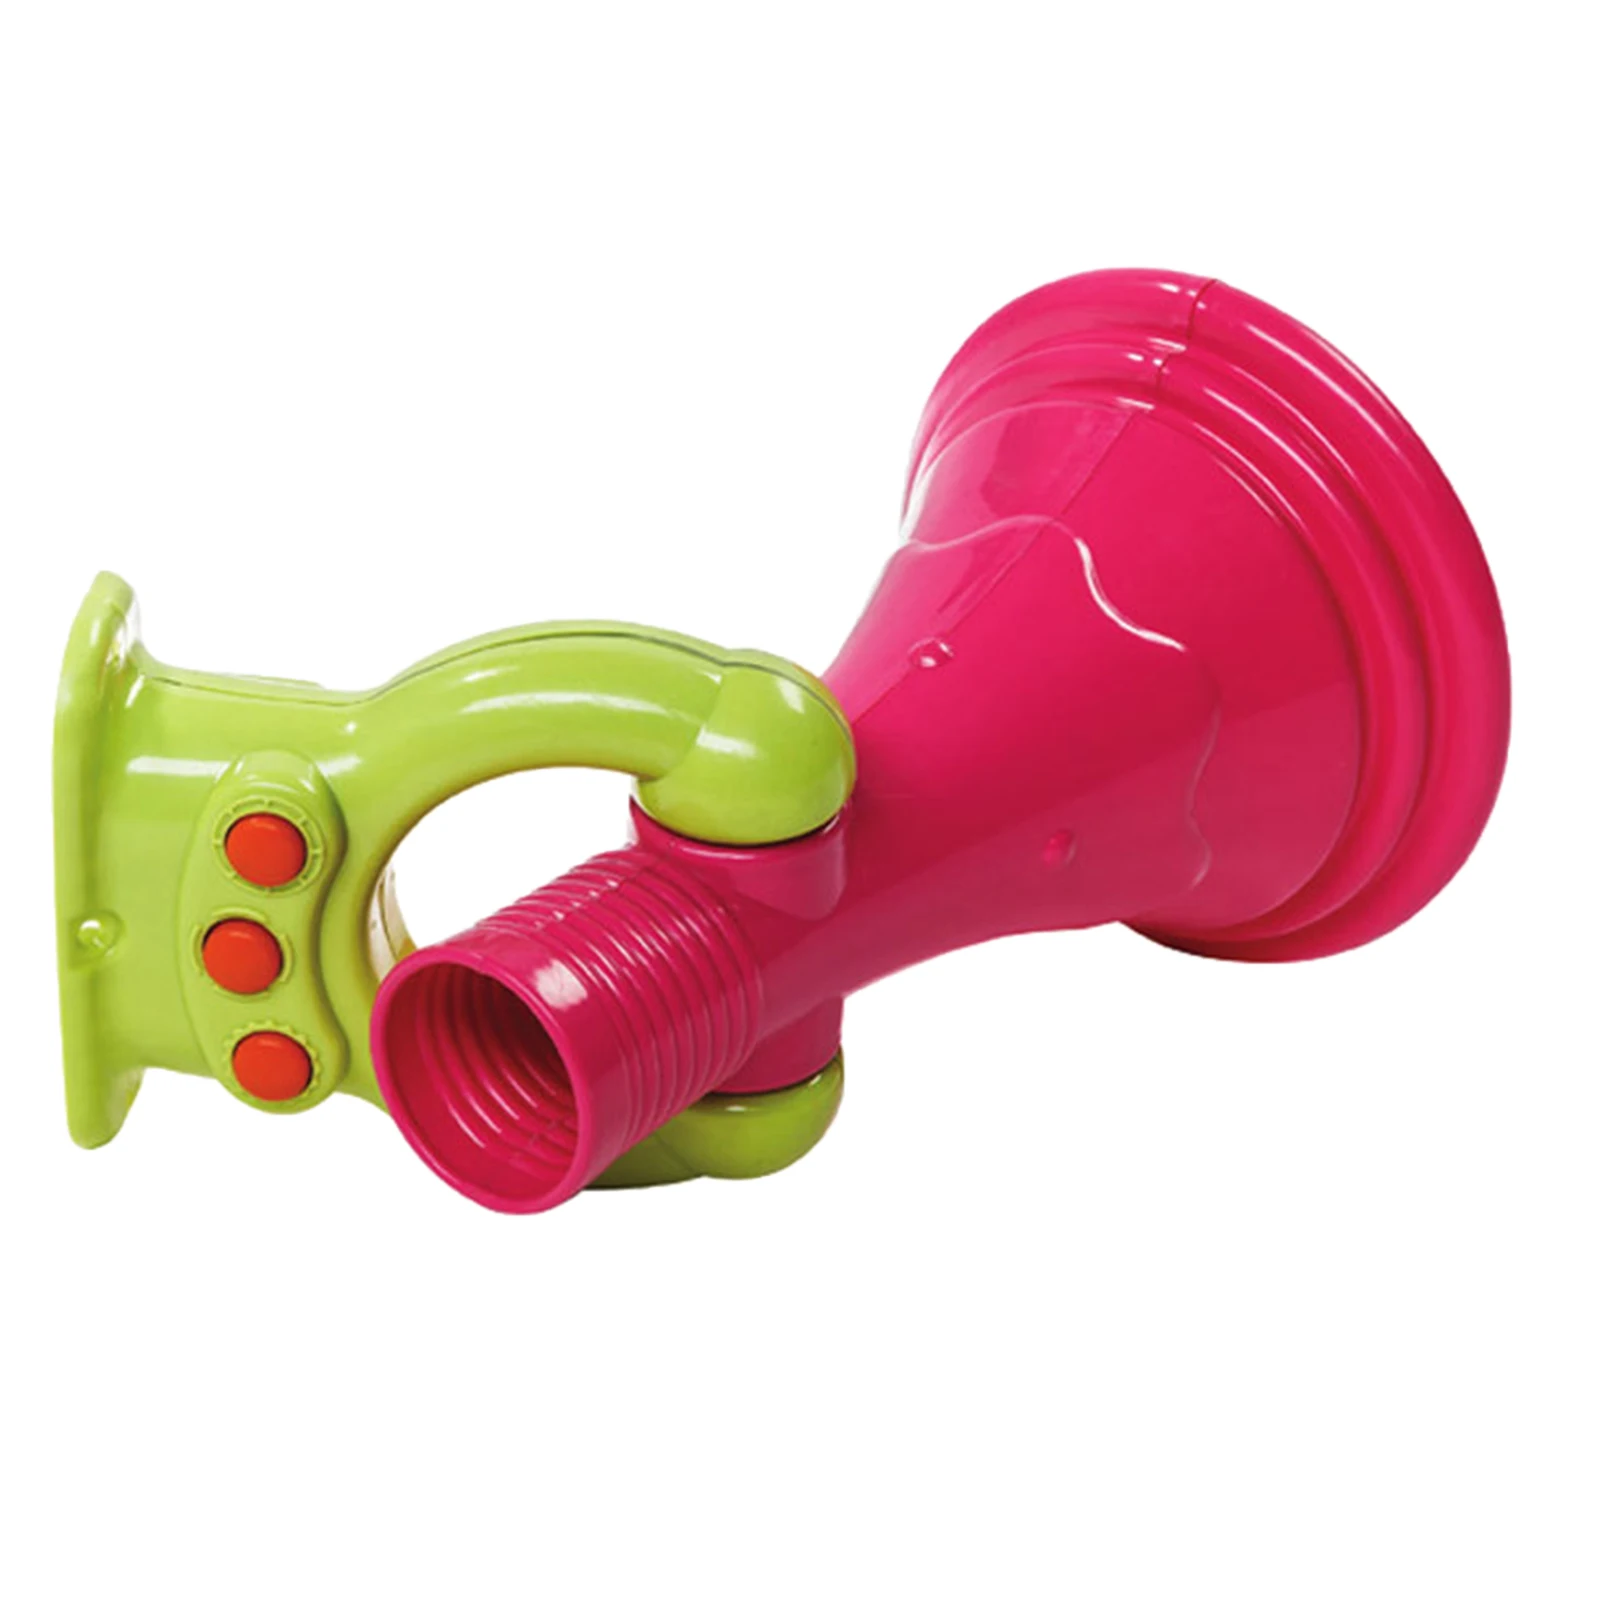 Pretend Play Kids Toy Megaphone Role Play Mounting Amusement Equipment Accessories for Kids